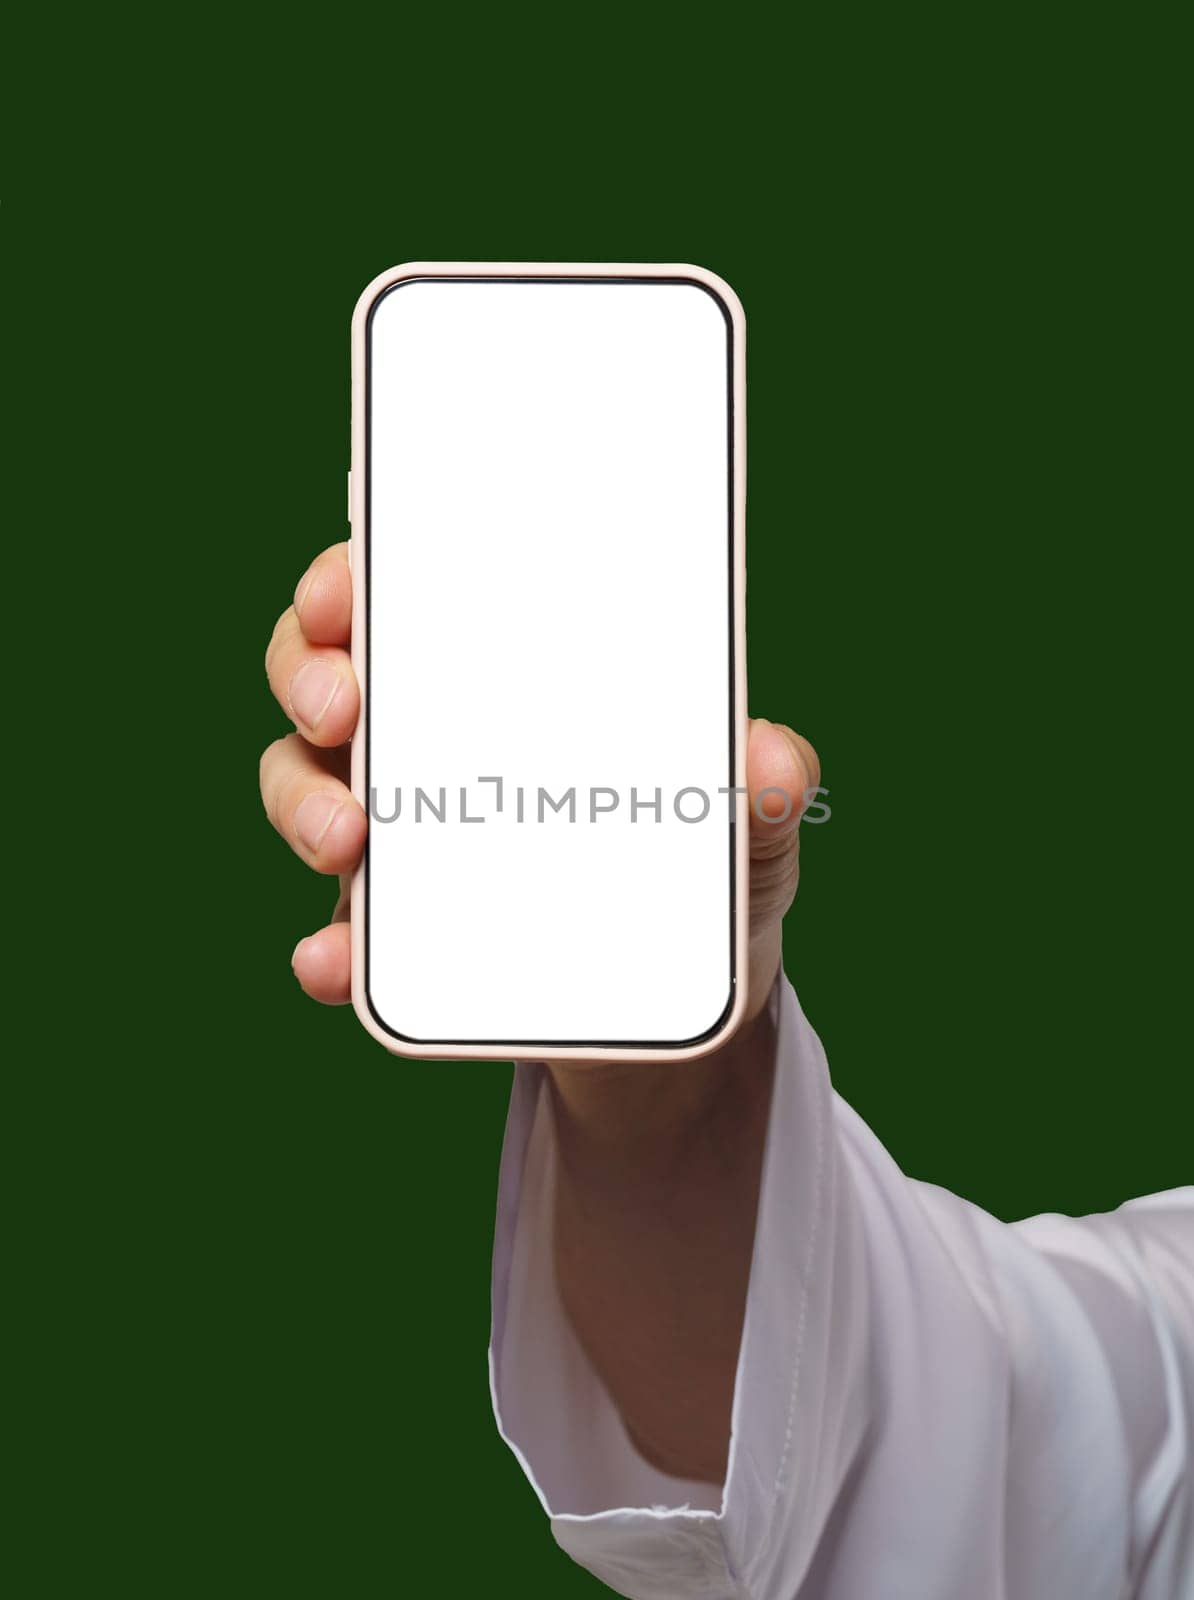 Man's hand holds smartphone with white screen on Islamic or Muslim green. Blank screen with space for copy or promotional content, ideal for app advertising and concepts with focus on Islamic audience. by LipikStockMedia